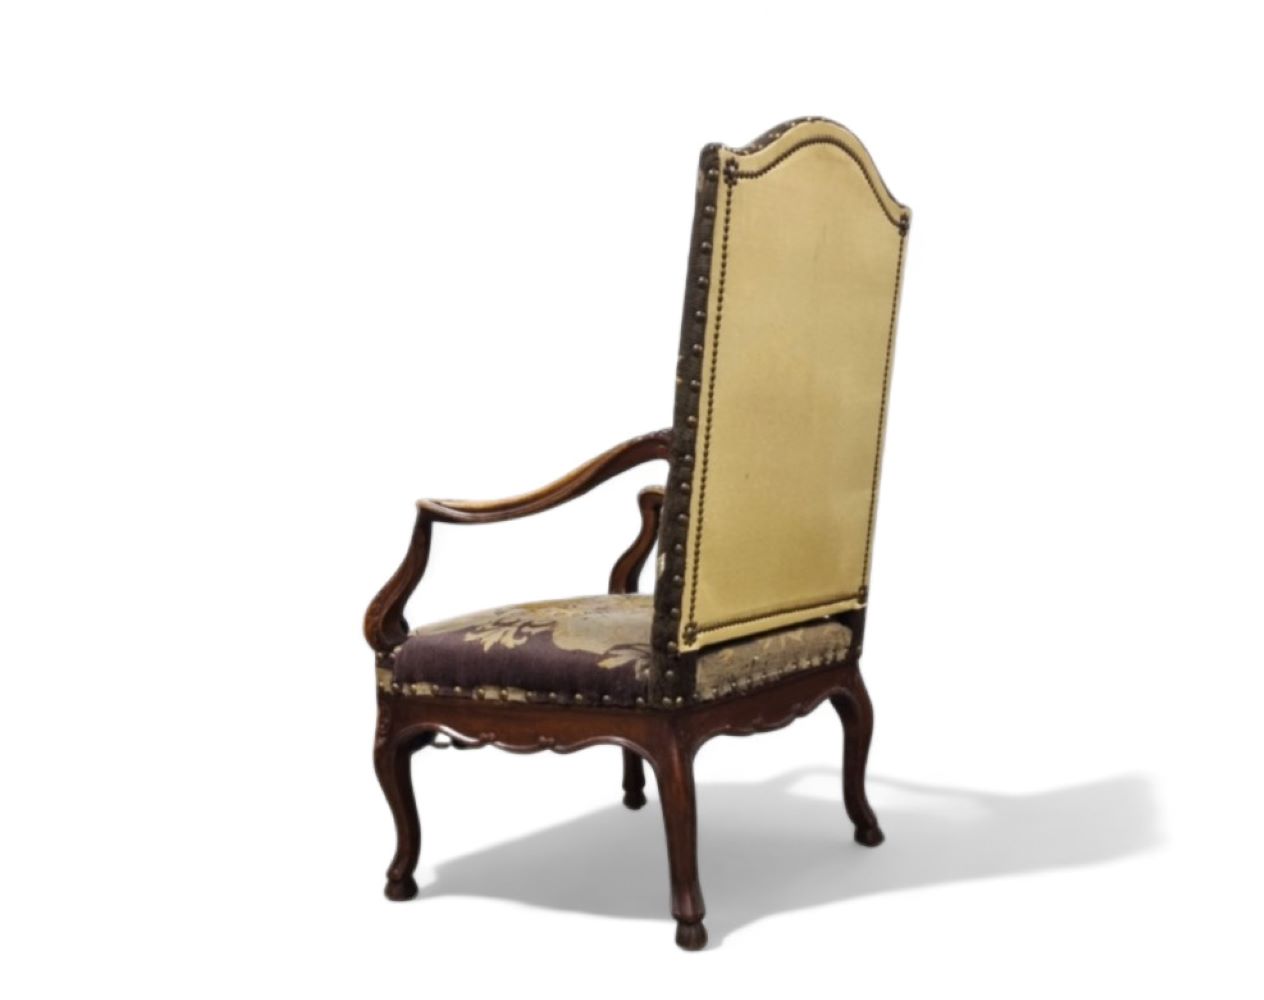 Carved wooden armchair and a seat with floral motifs from the 18th century - Image 3 of 4